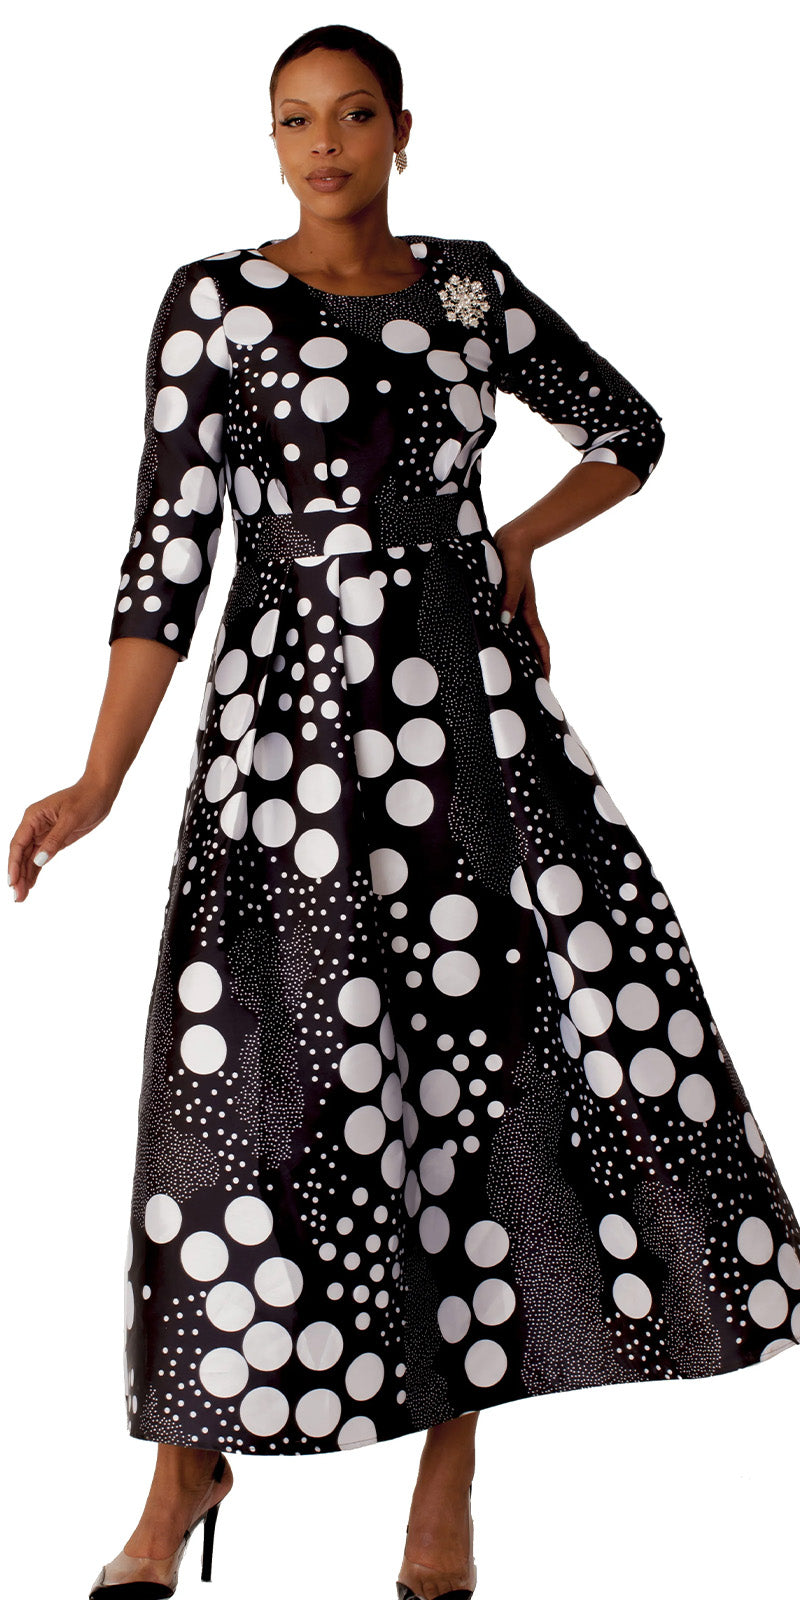 Tally Taylor Church Dress 4497-Black/White Dots - Church Suits For Less